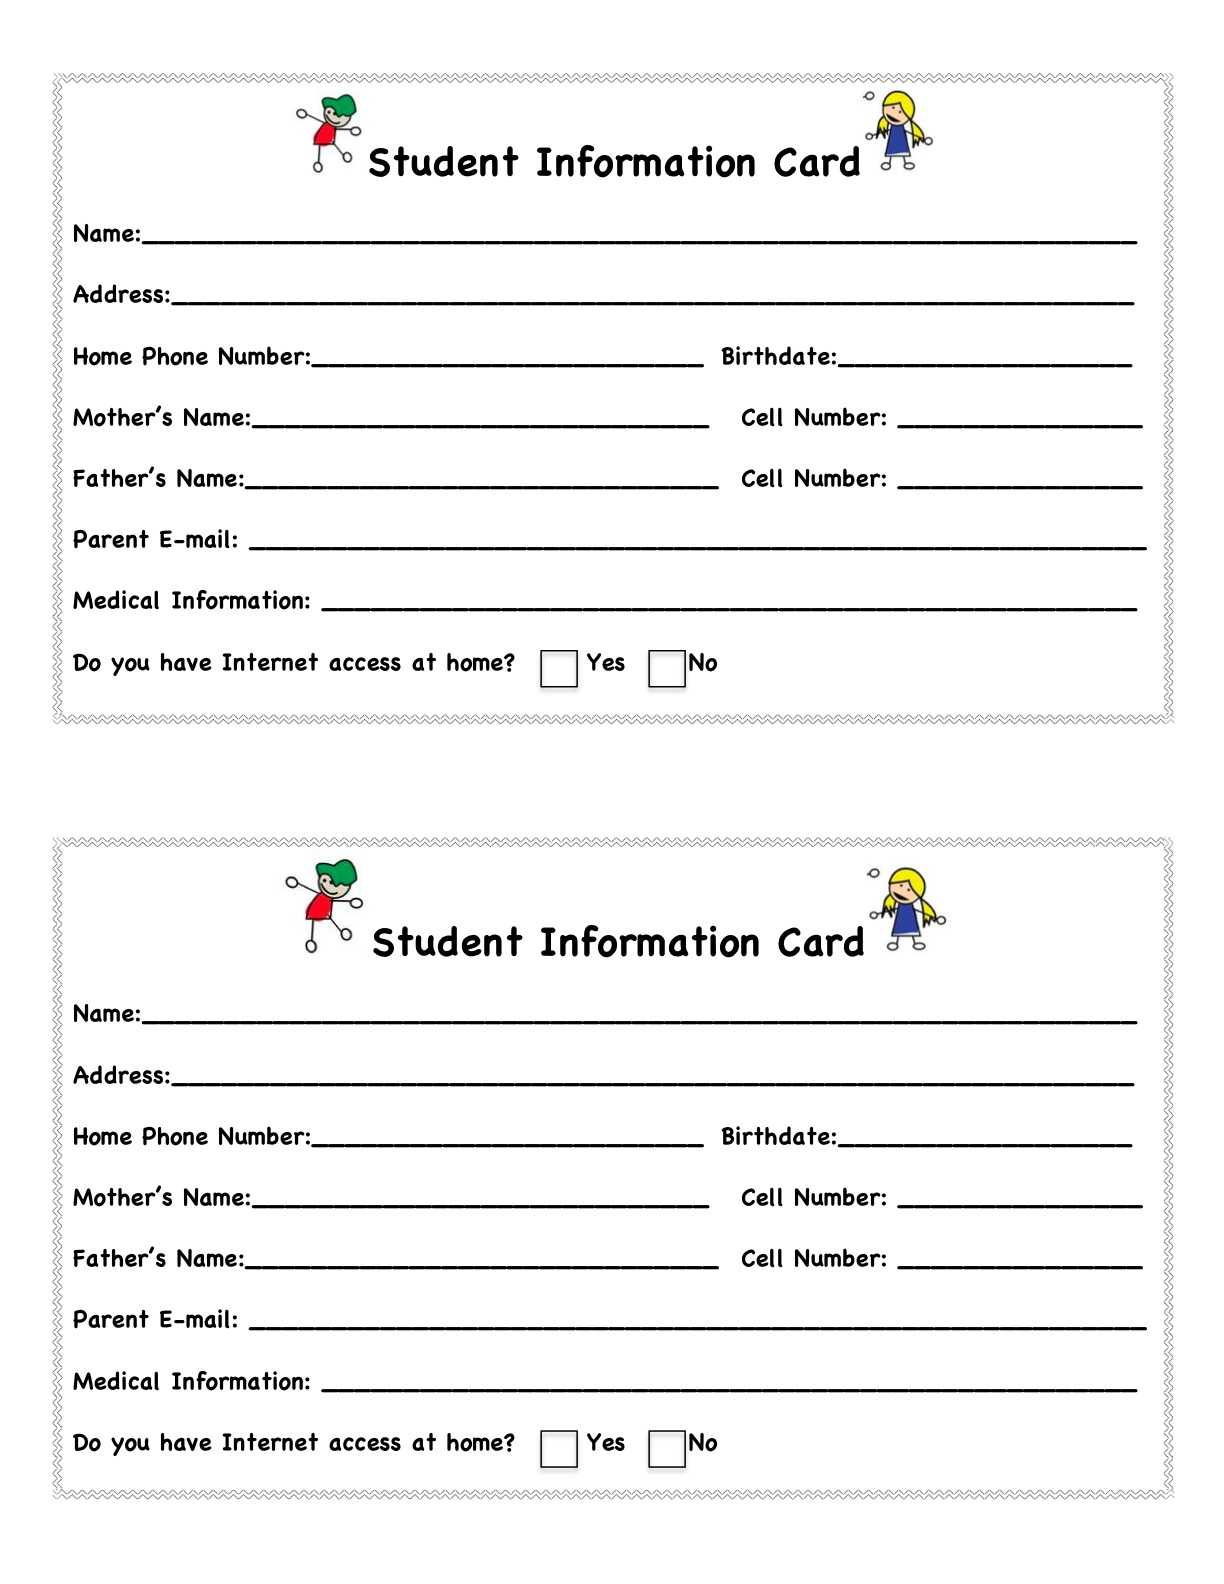 Student Information Card Template ] - Back To School In Student Information Card Template